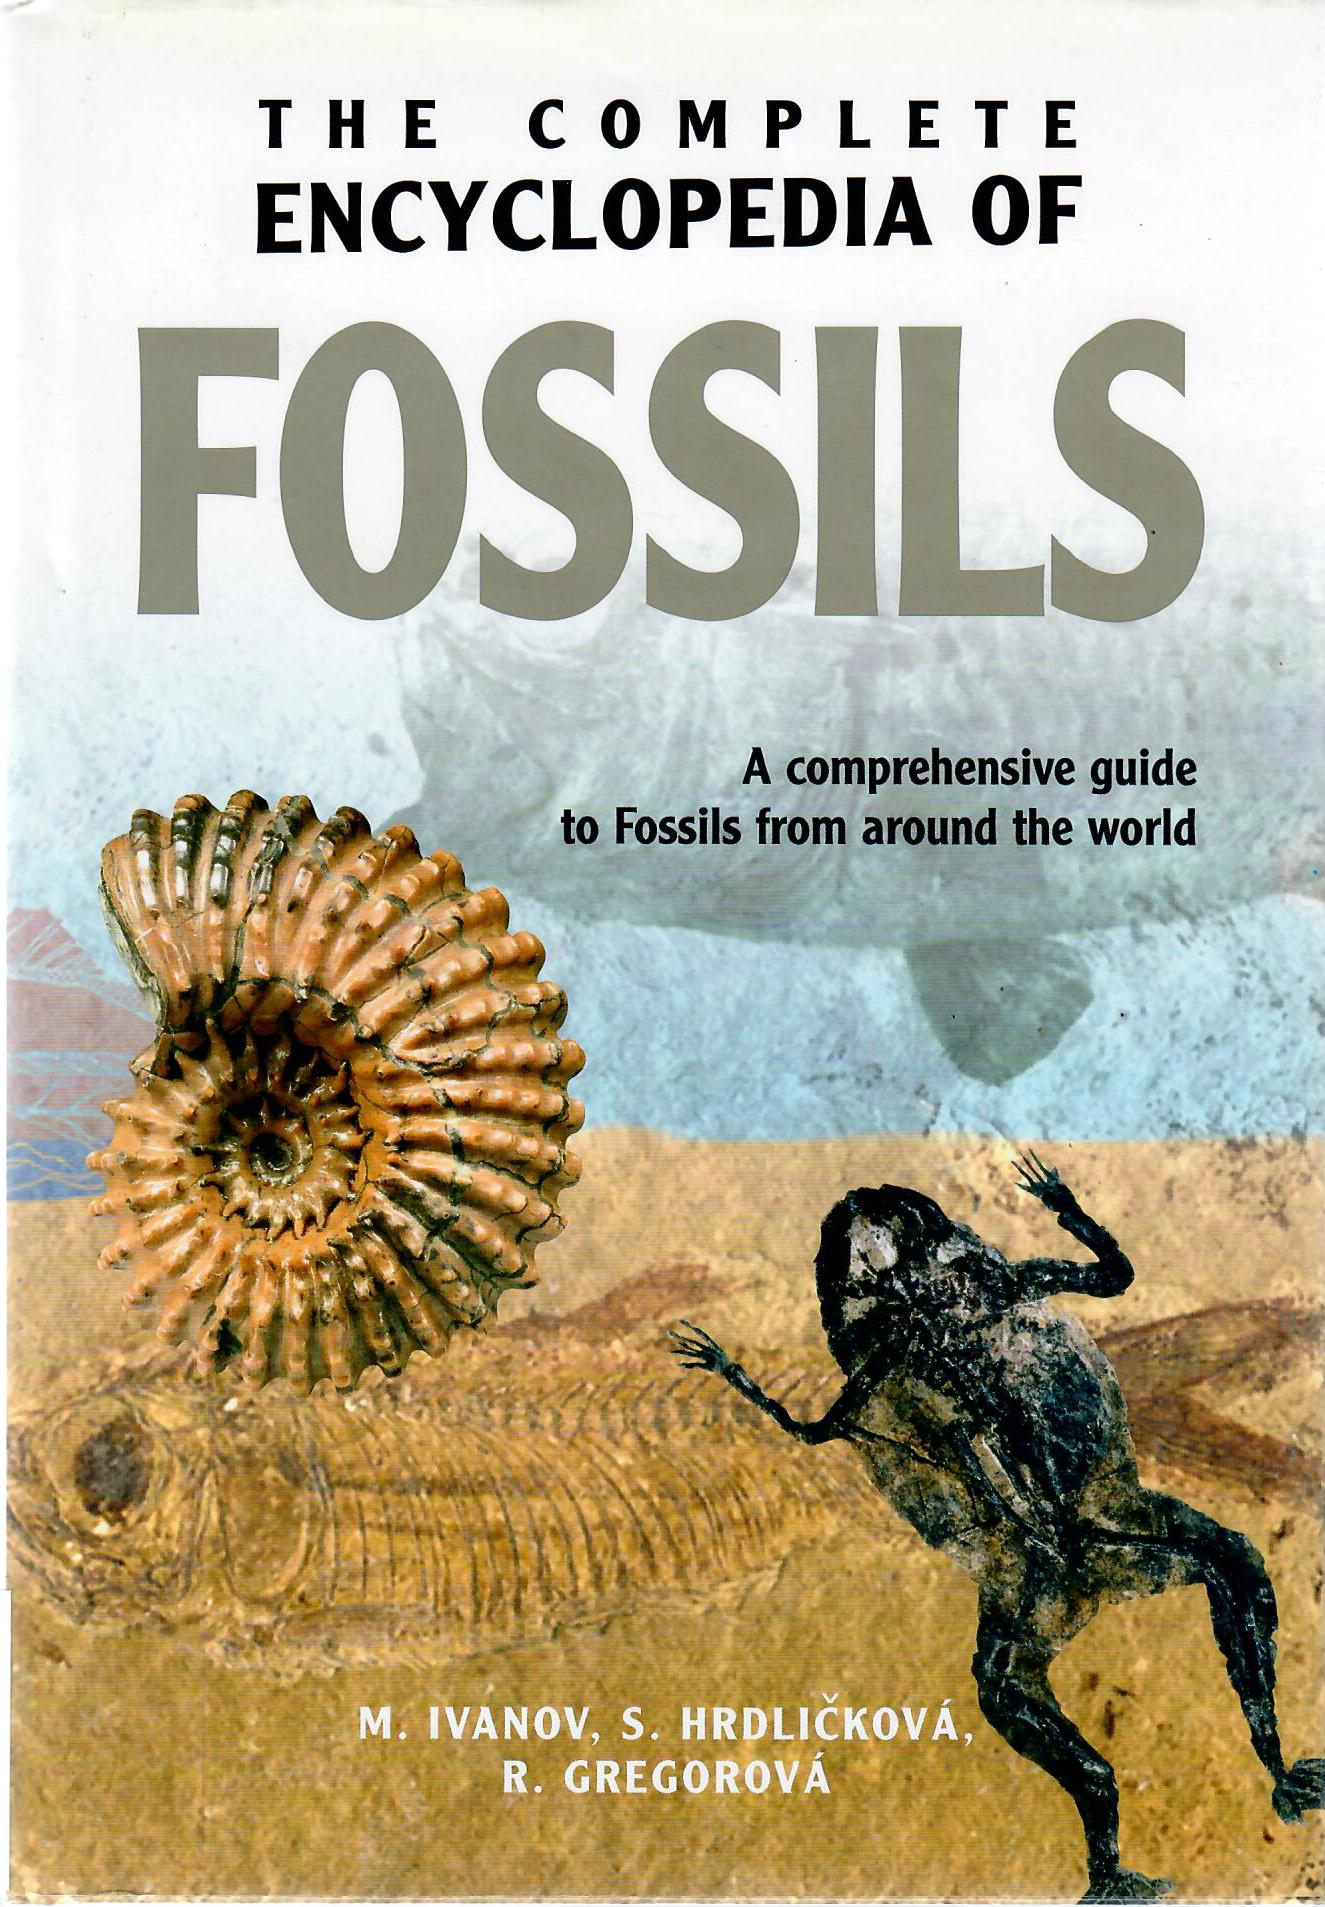 THE COMPLETE ENCYCLOPEDIA OF FOSSILS